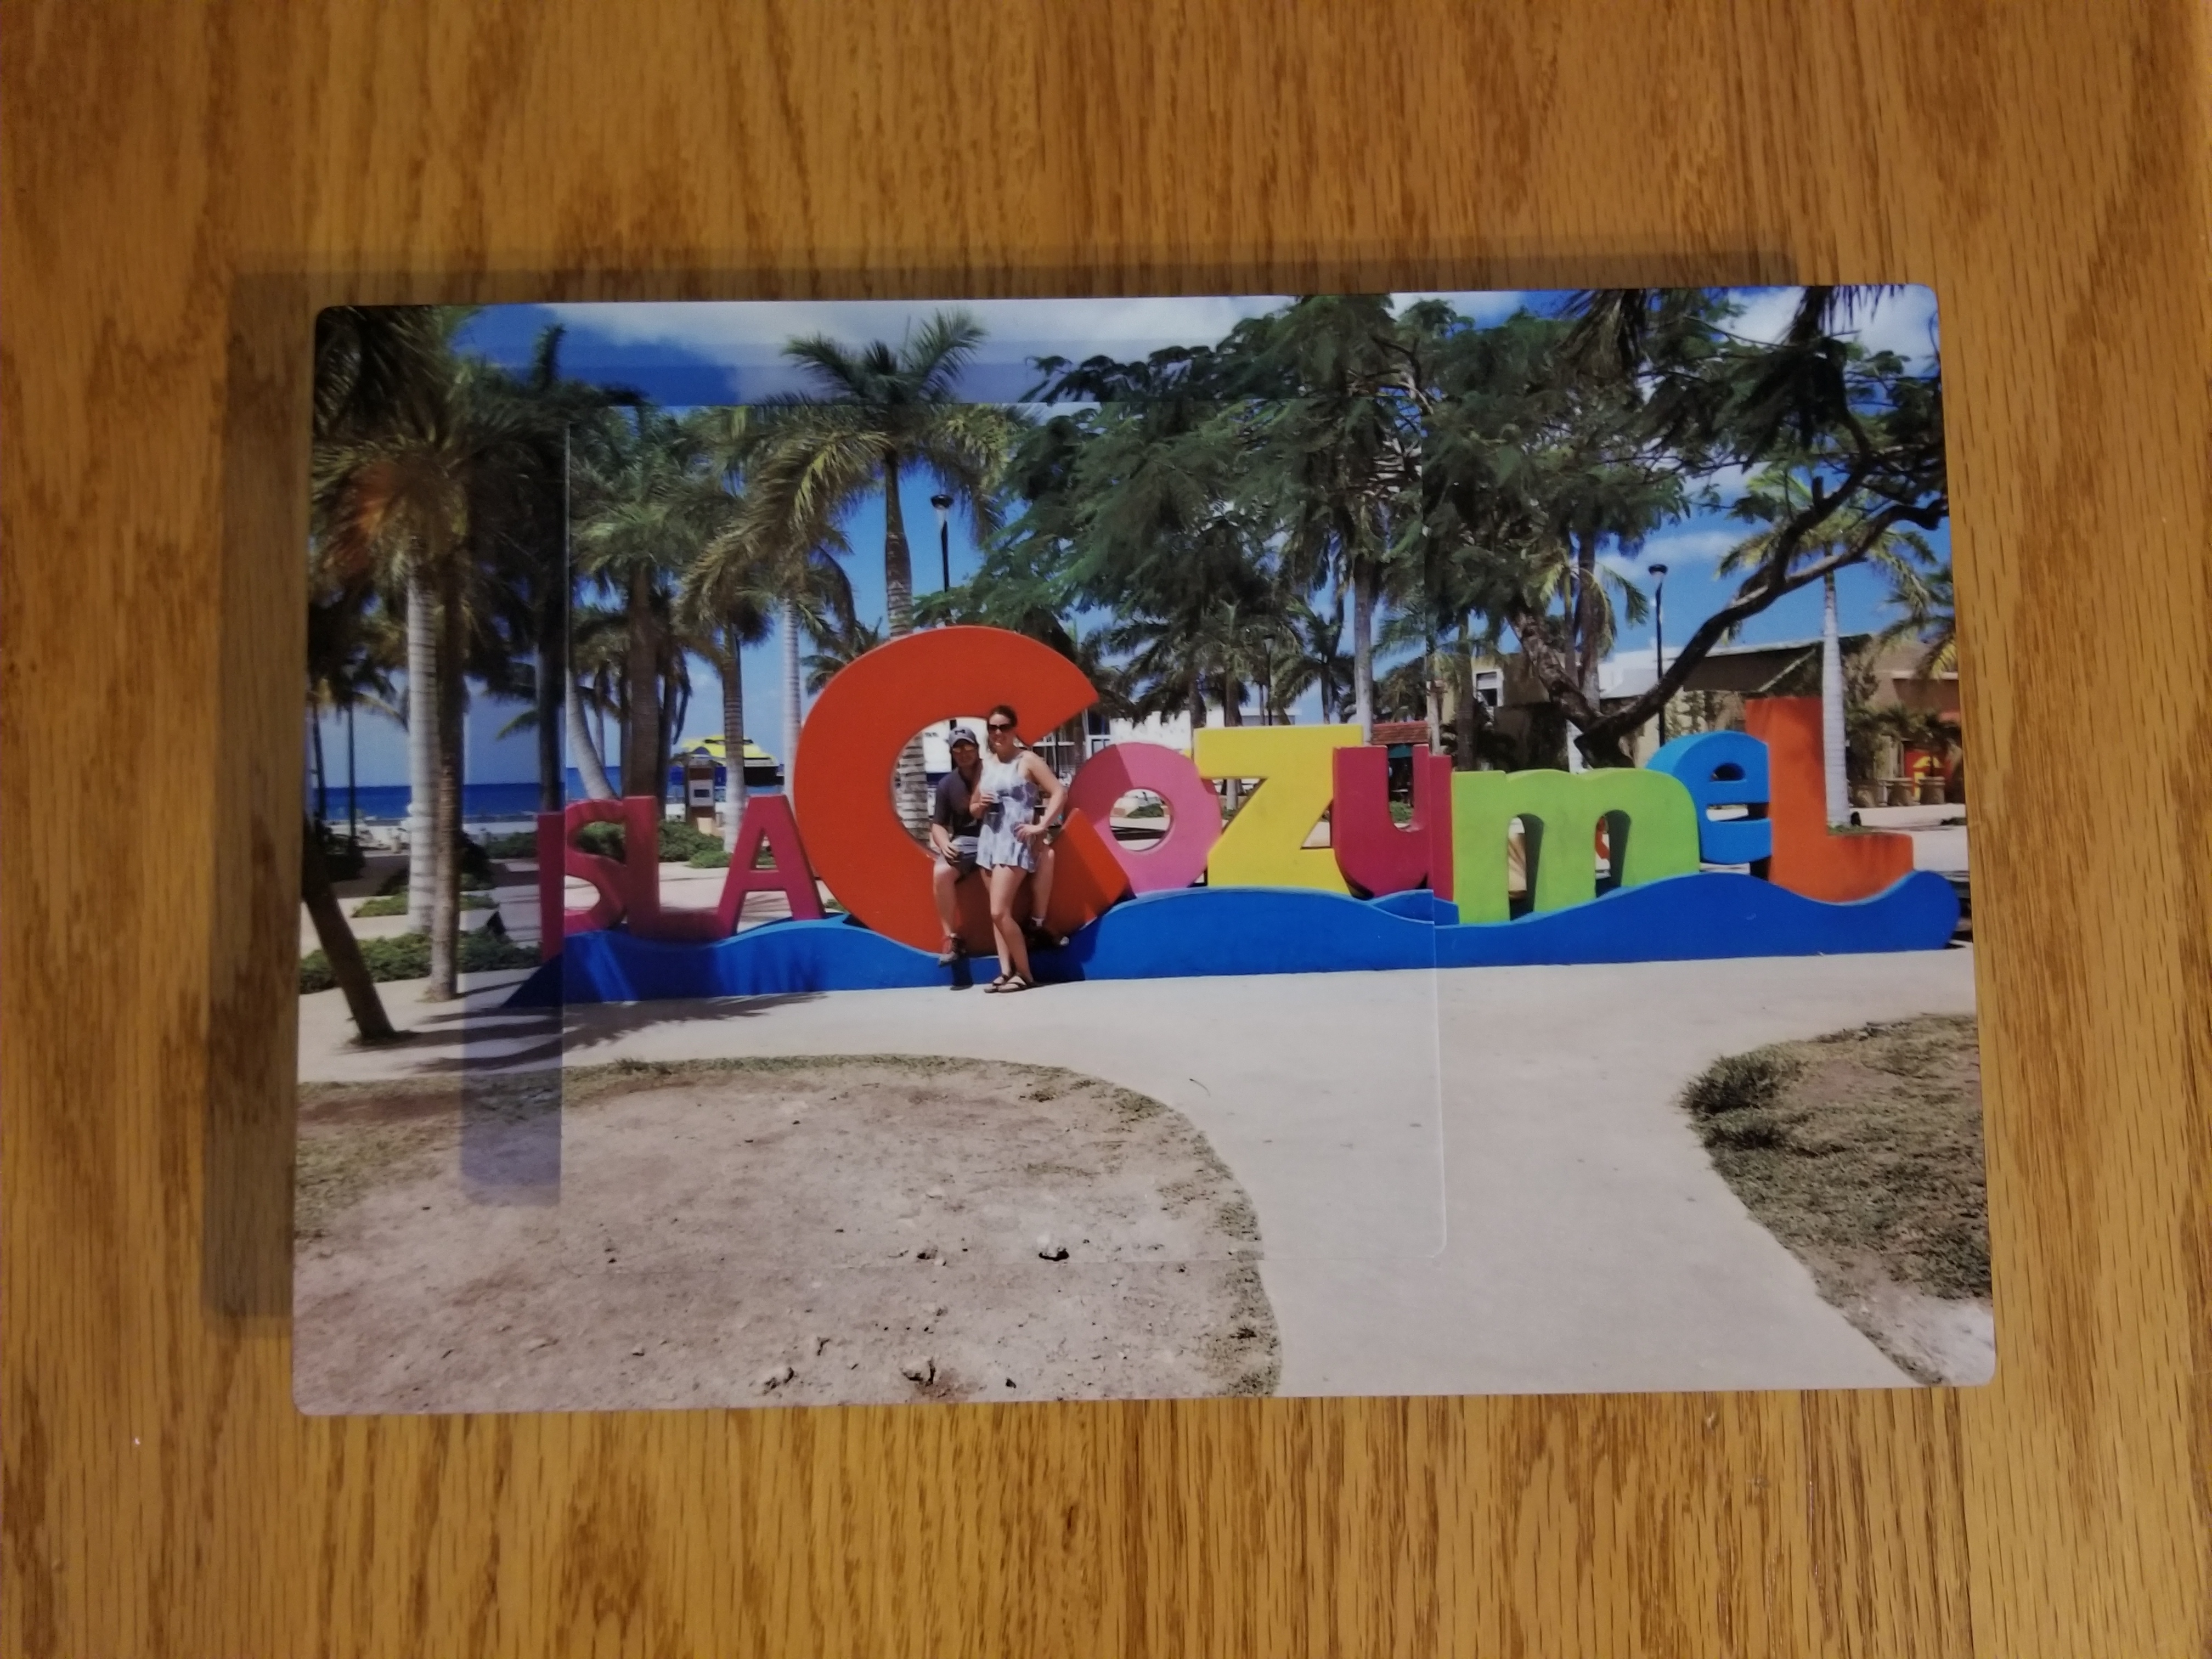 Cozumel made with sublimation printing